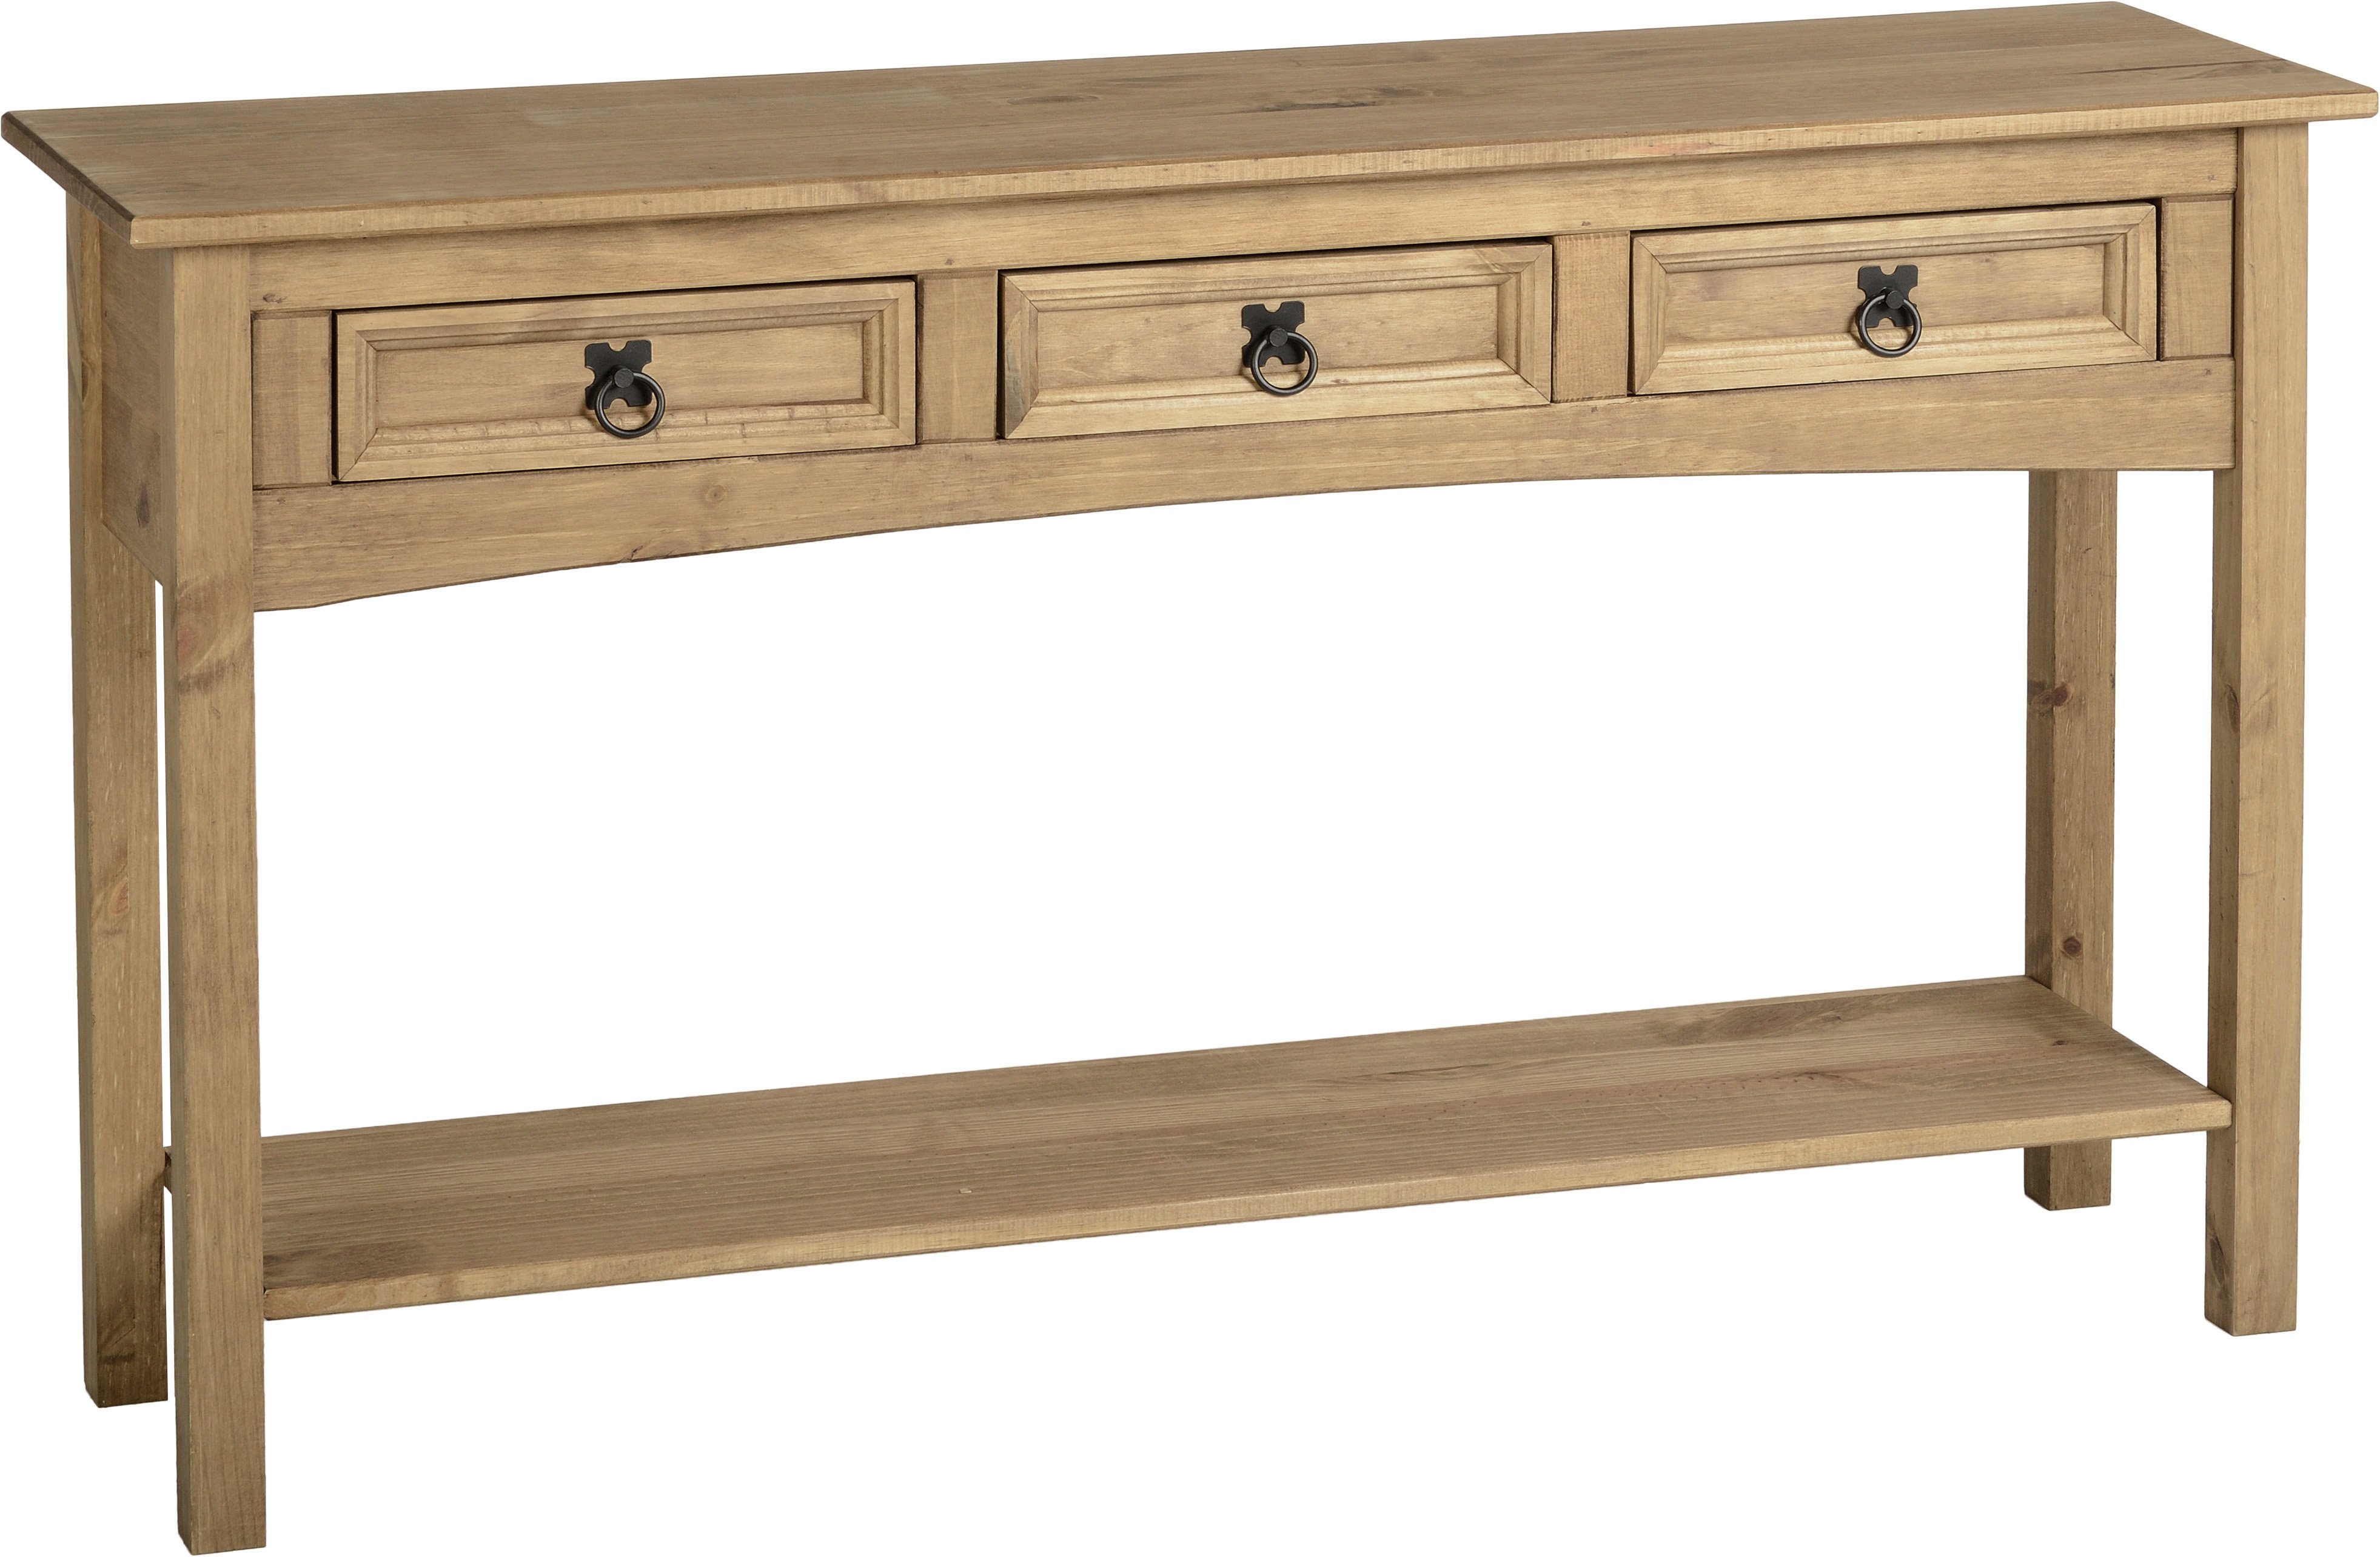 BBS132  CORONA 3 DRAWER CONSOLE TABLE WITH SHELF - DISTRESSED WAXED PINE